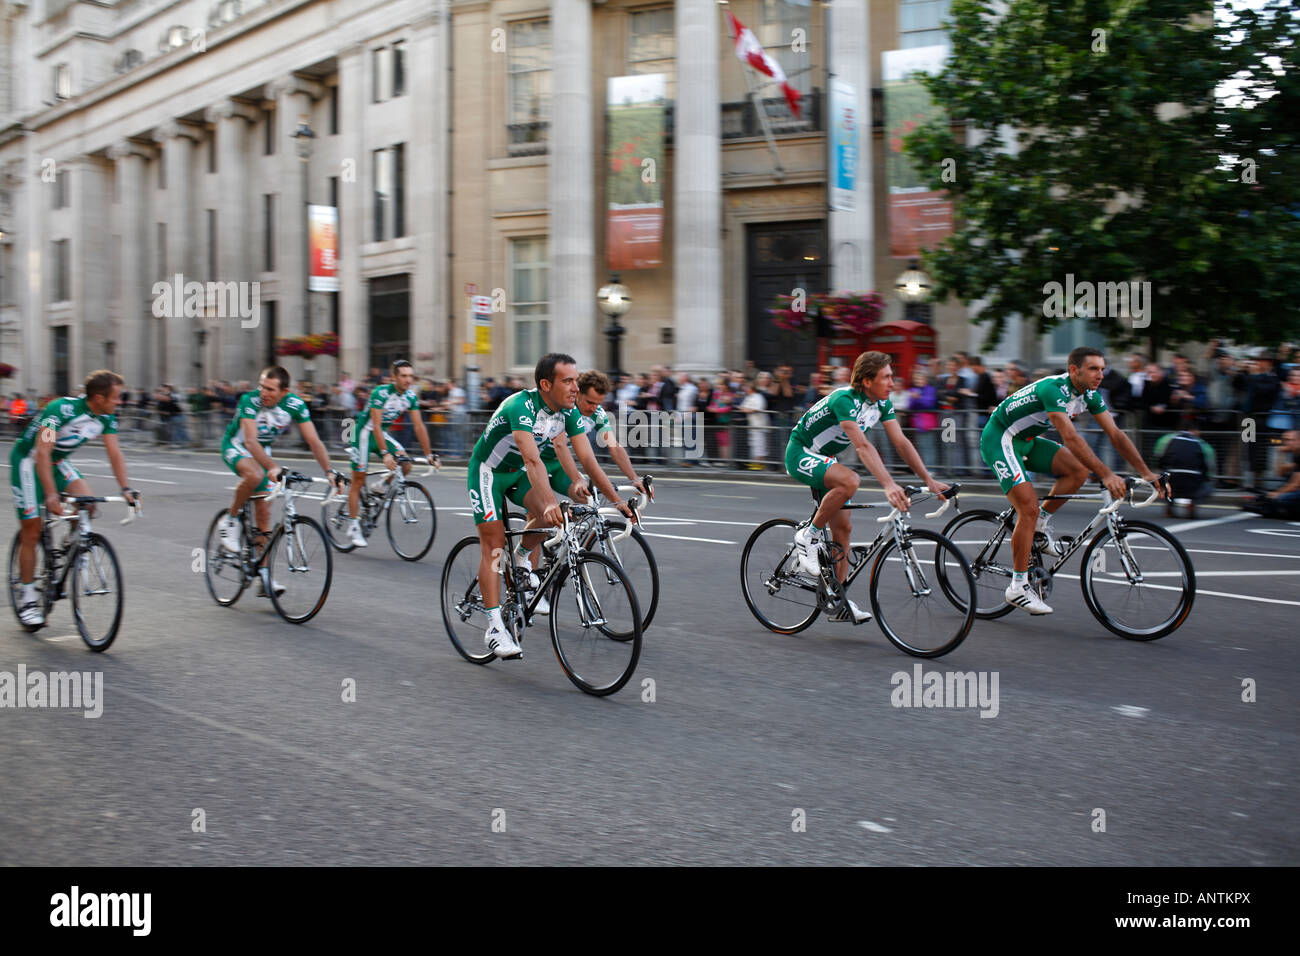 Cycling Exhibition High Resolution Stock Photography and Images - Alamy